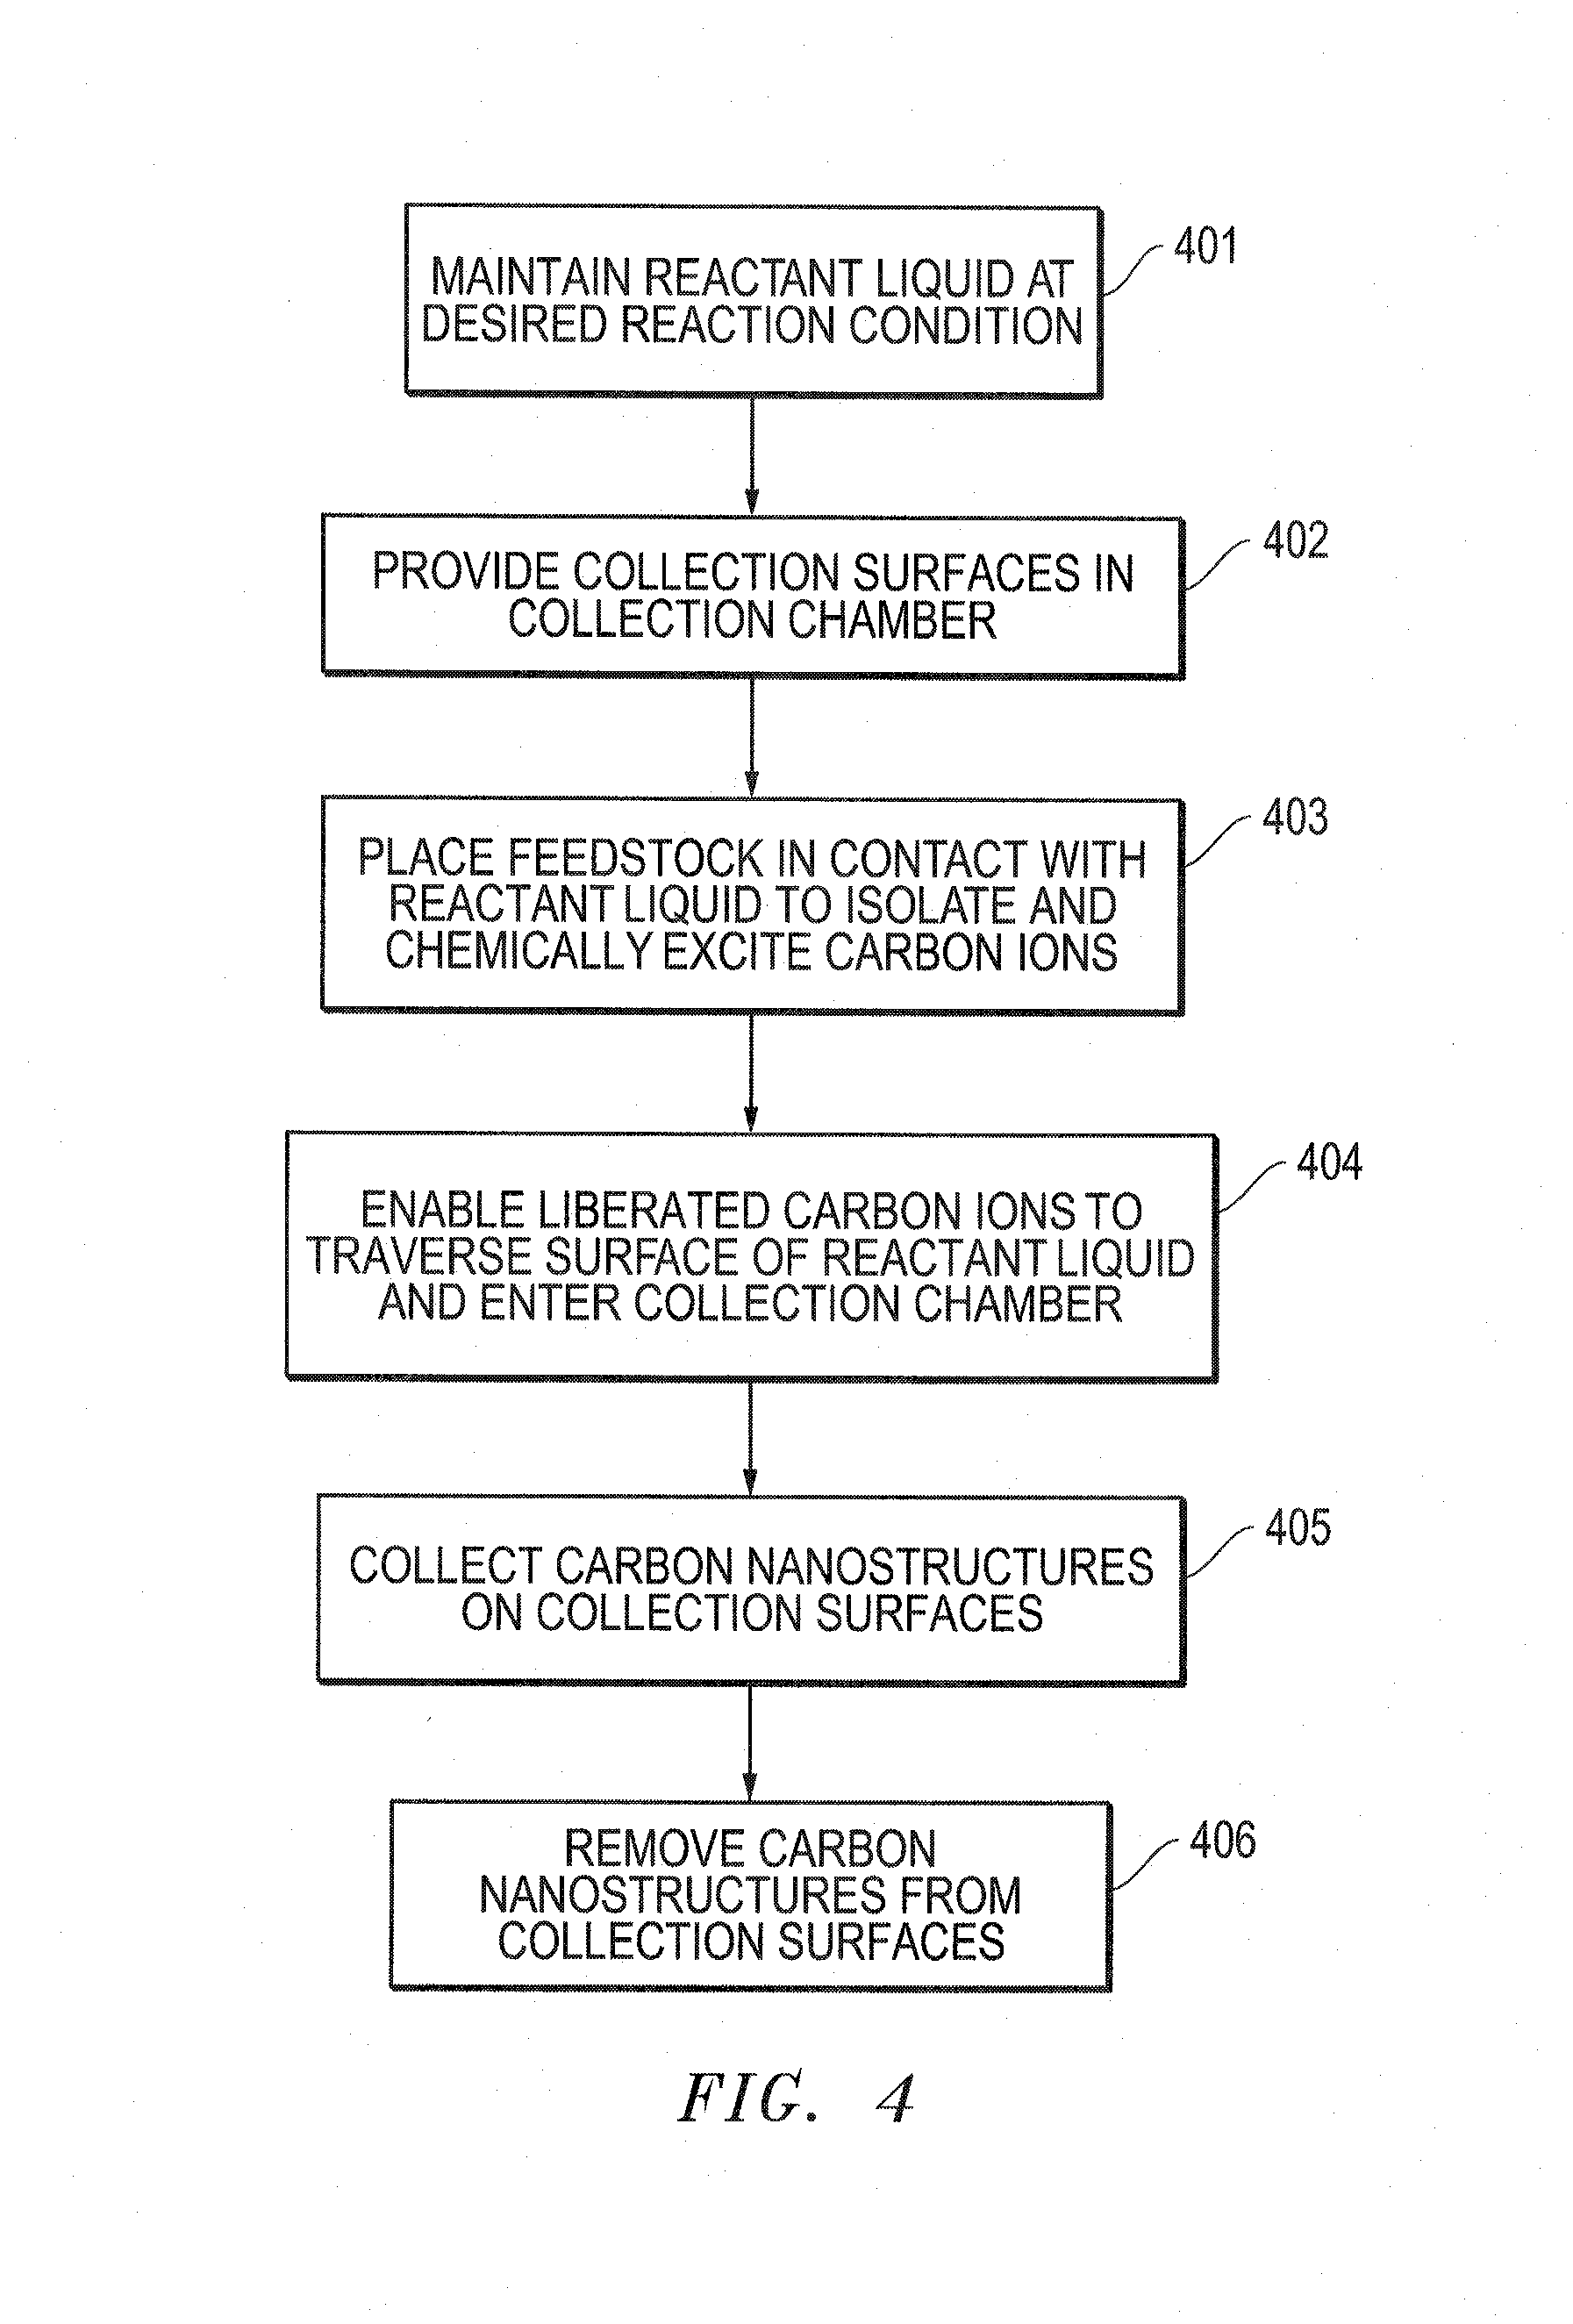 Spherical carbon nanostructure and method for producing spherical carbon nanostructures